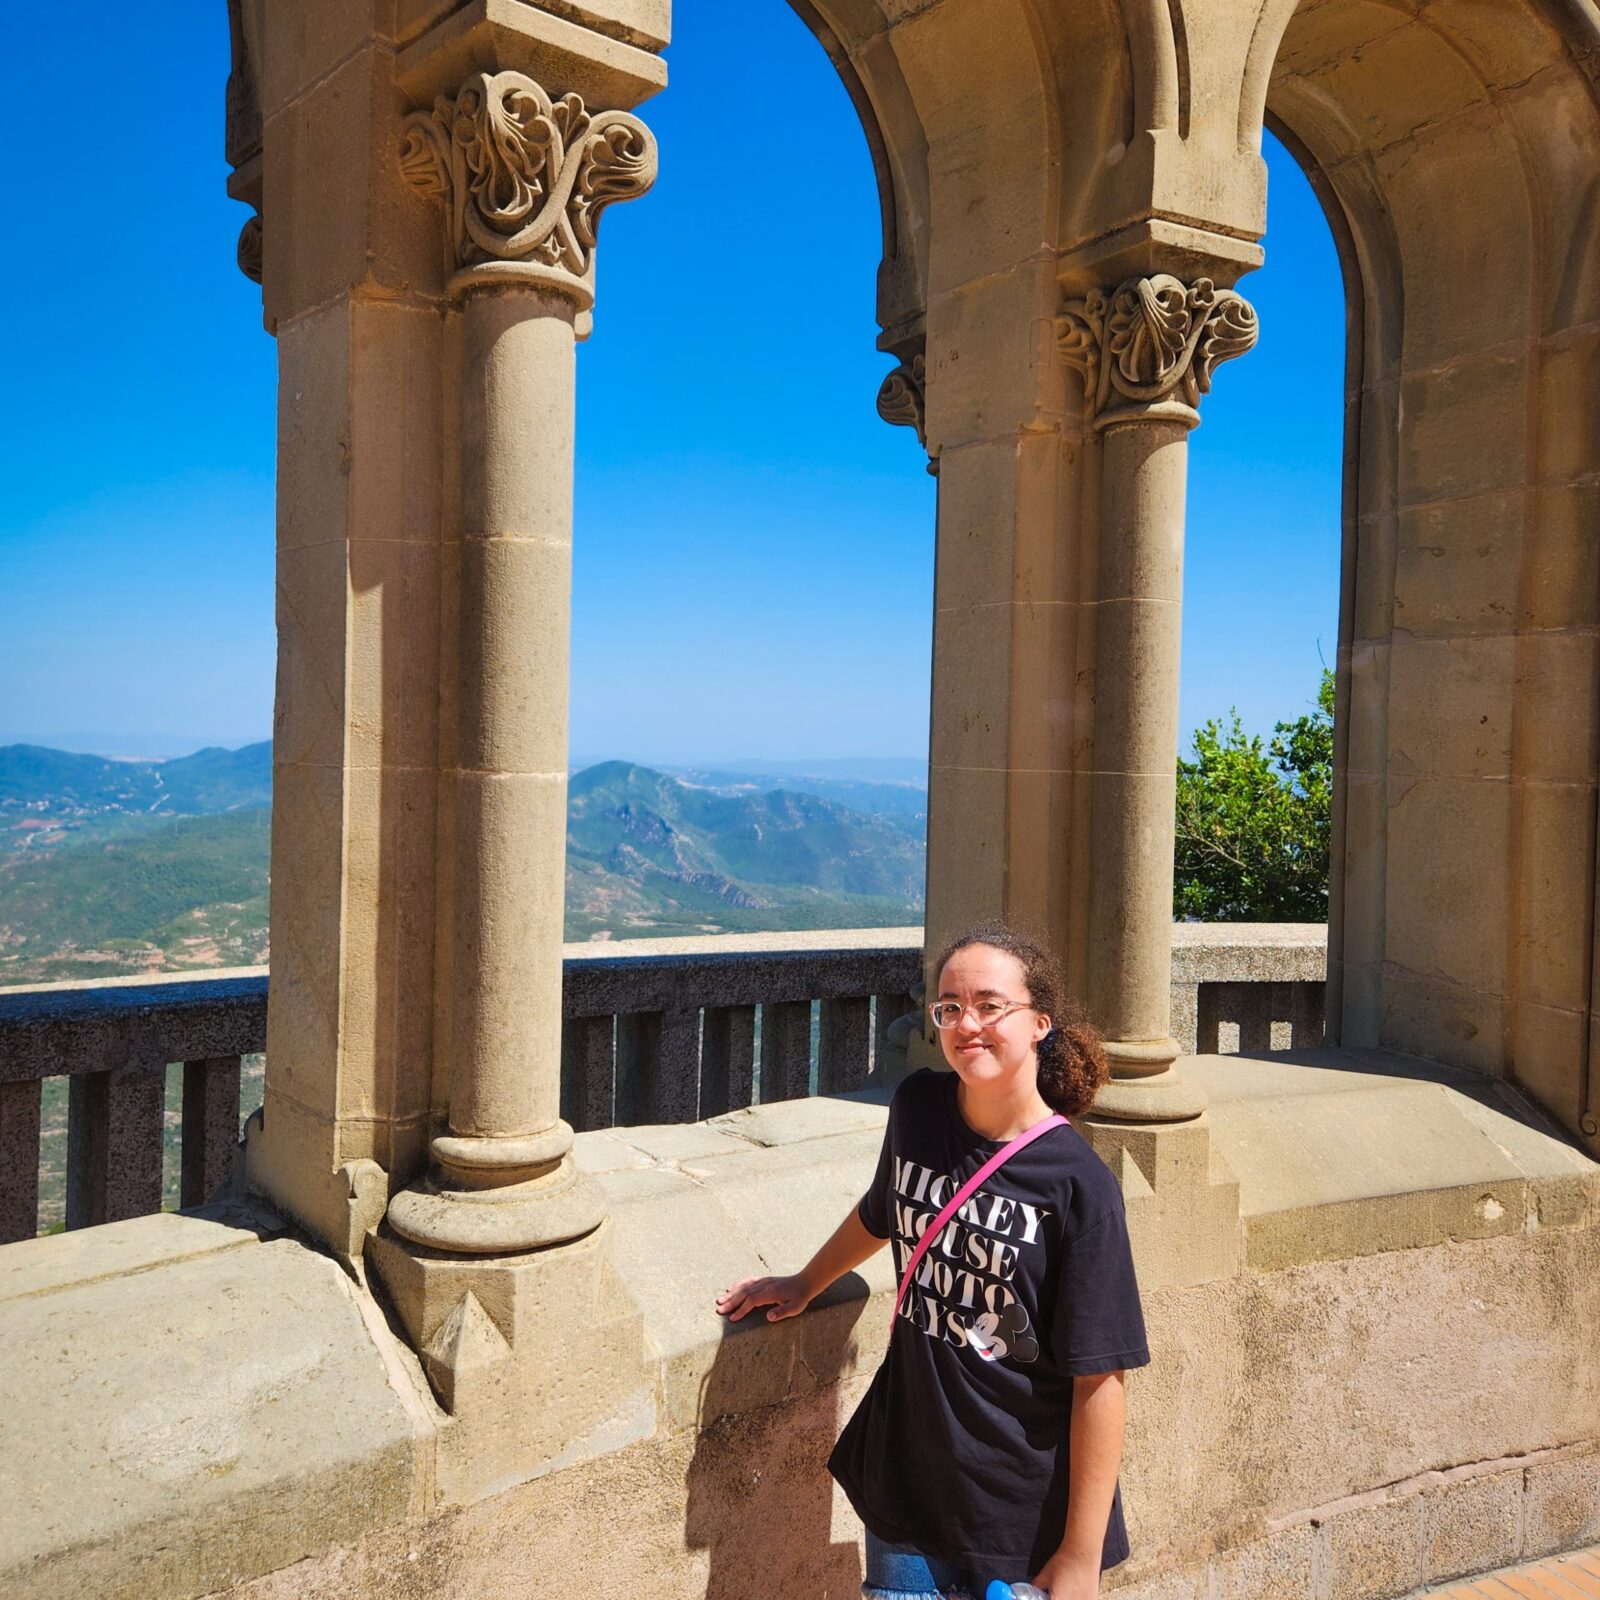 standing in front of columns with mountain views at montserrat